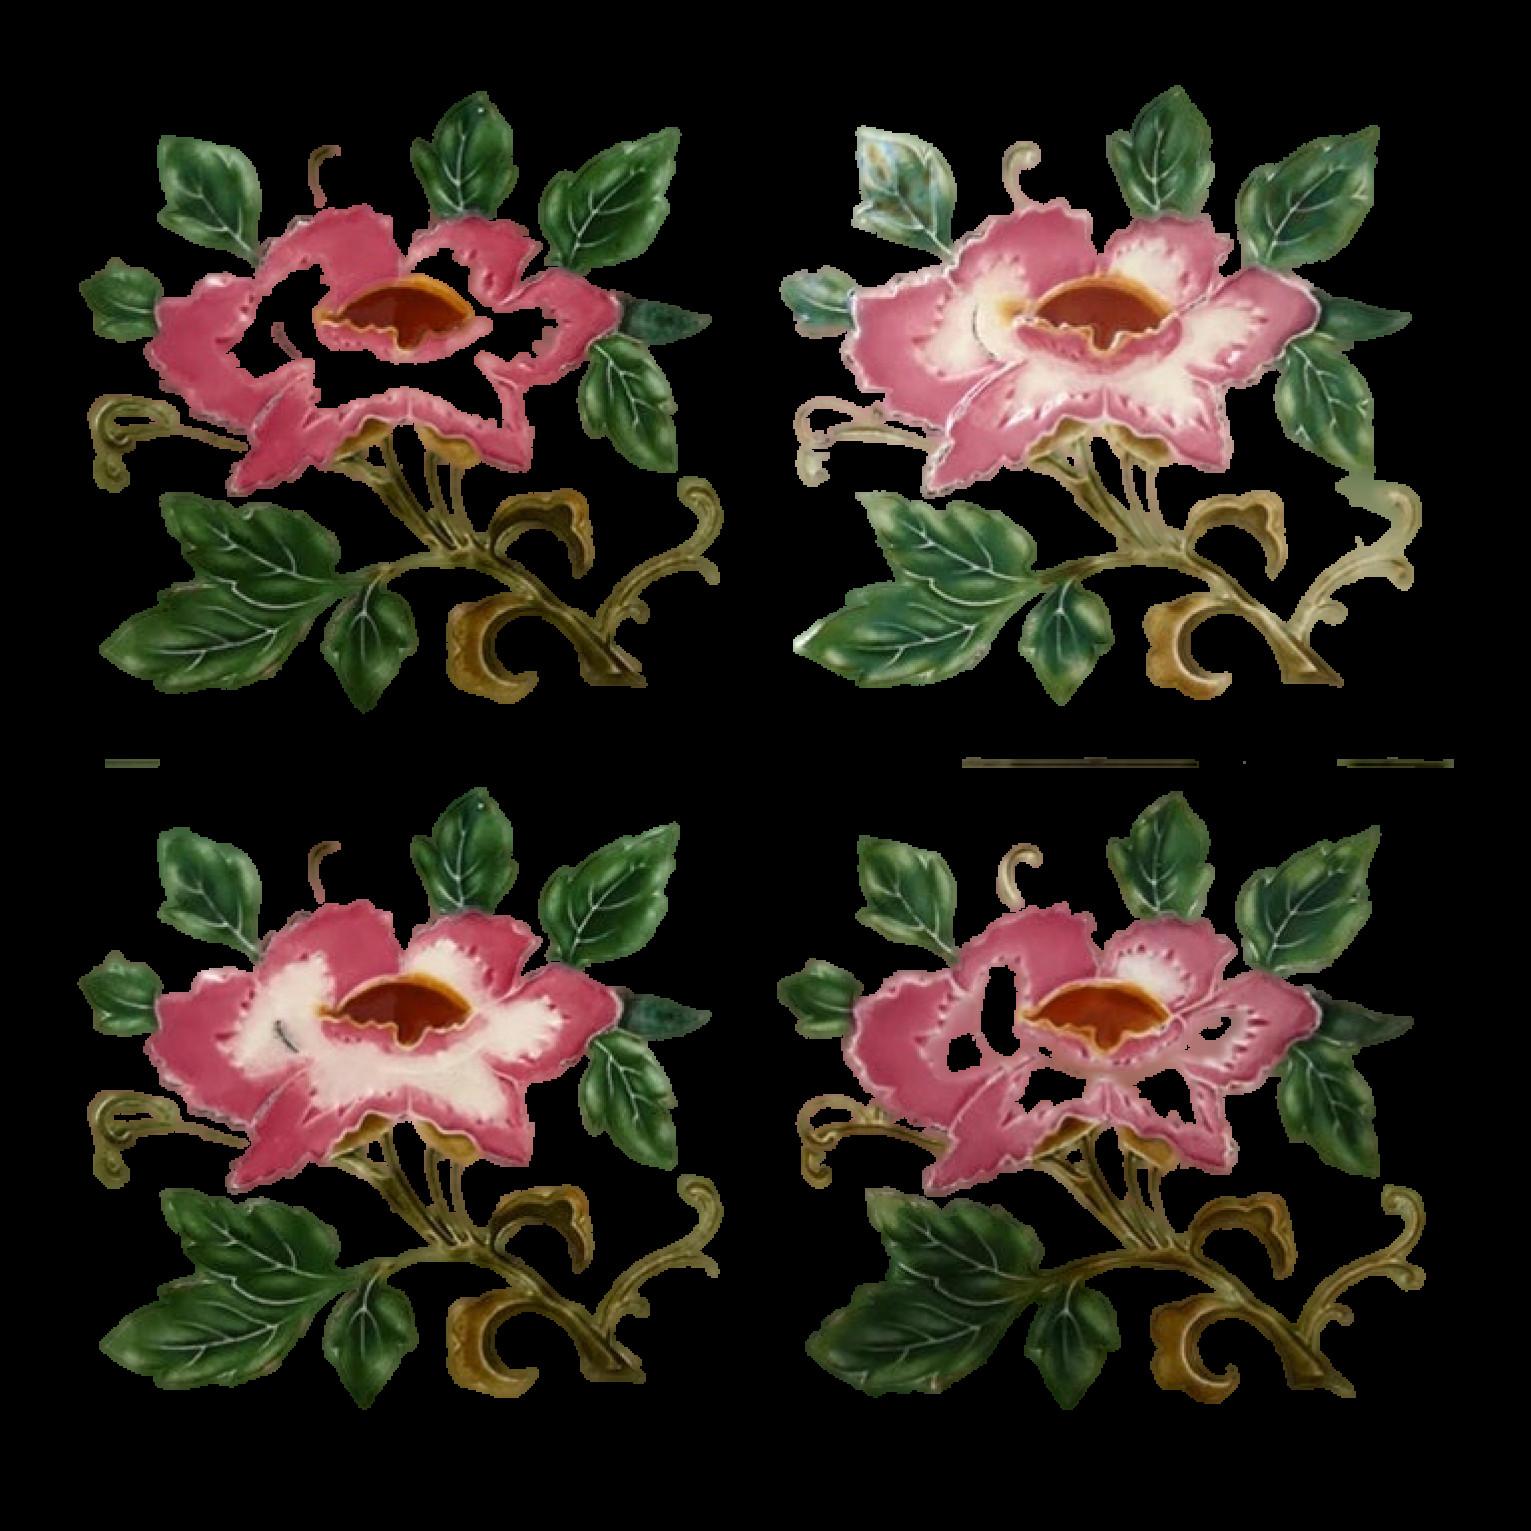 This is an amazing set of antique Art Nouveau handmade tiles with an image of pink rose in relief on a soft yellow background. These tiles would be charming displayed on easels, framed or incorporated into a custom tile design.

Please note that the